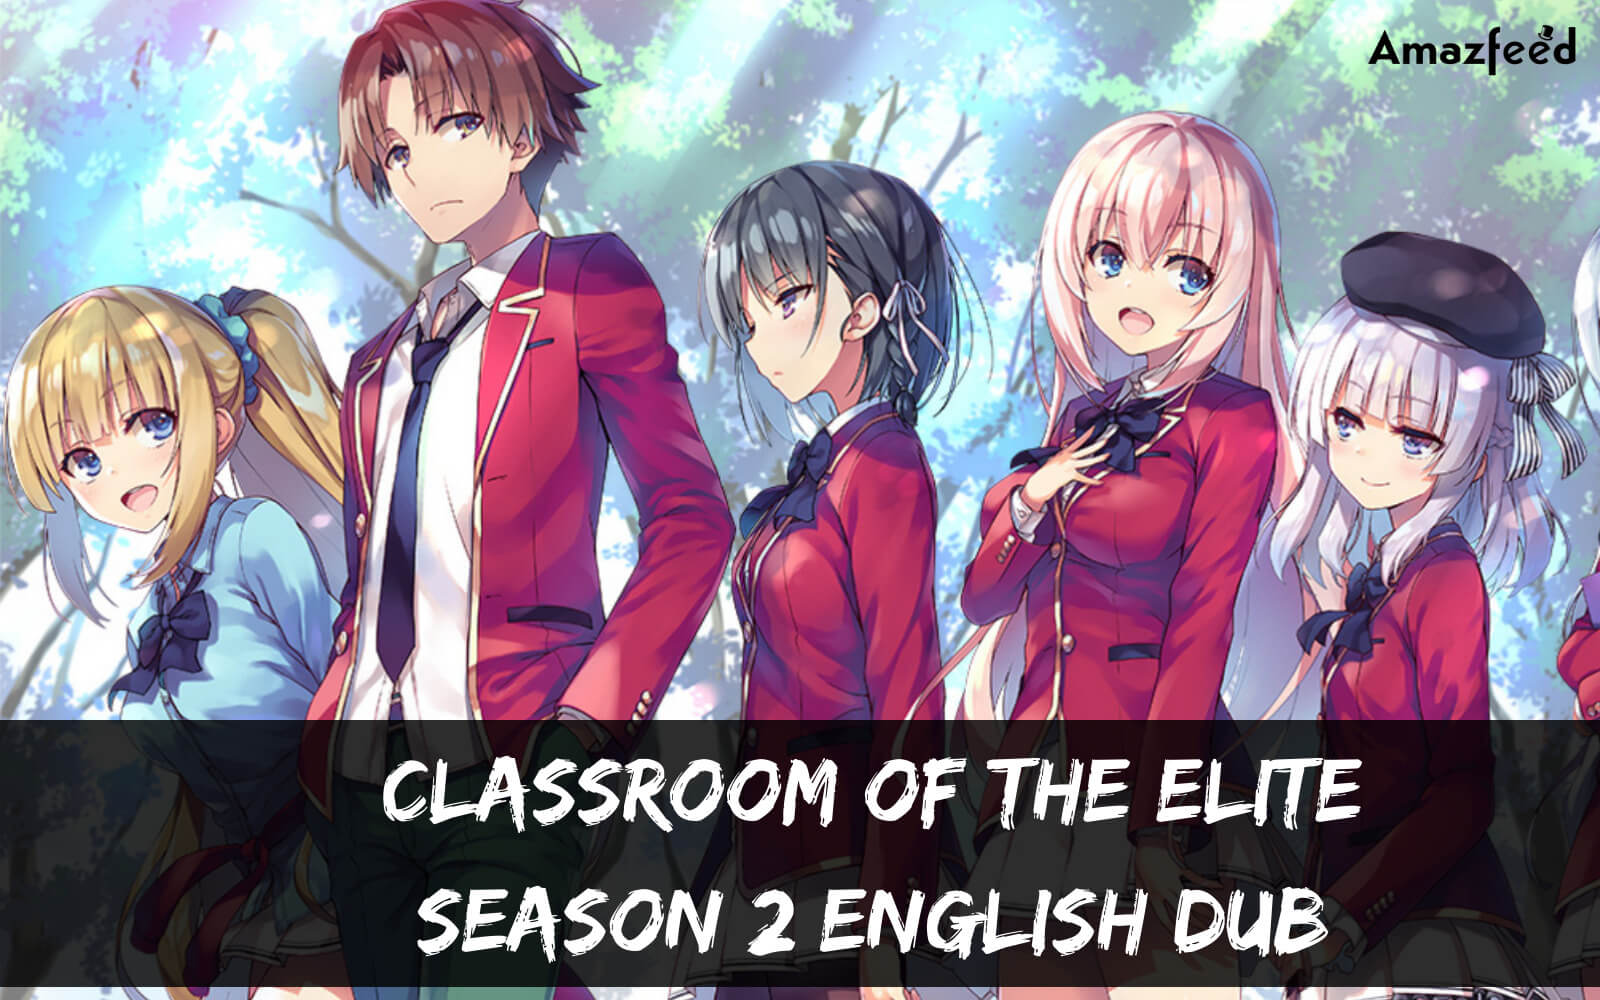 Classroom of the Elite Season 2 Release Date And Episode Count